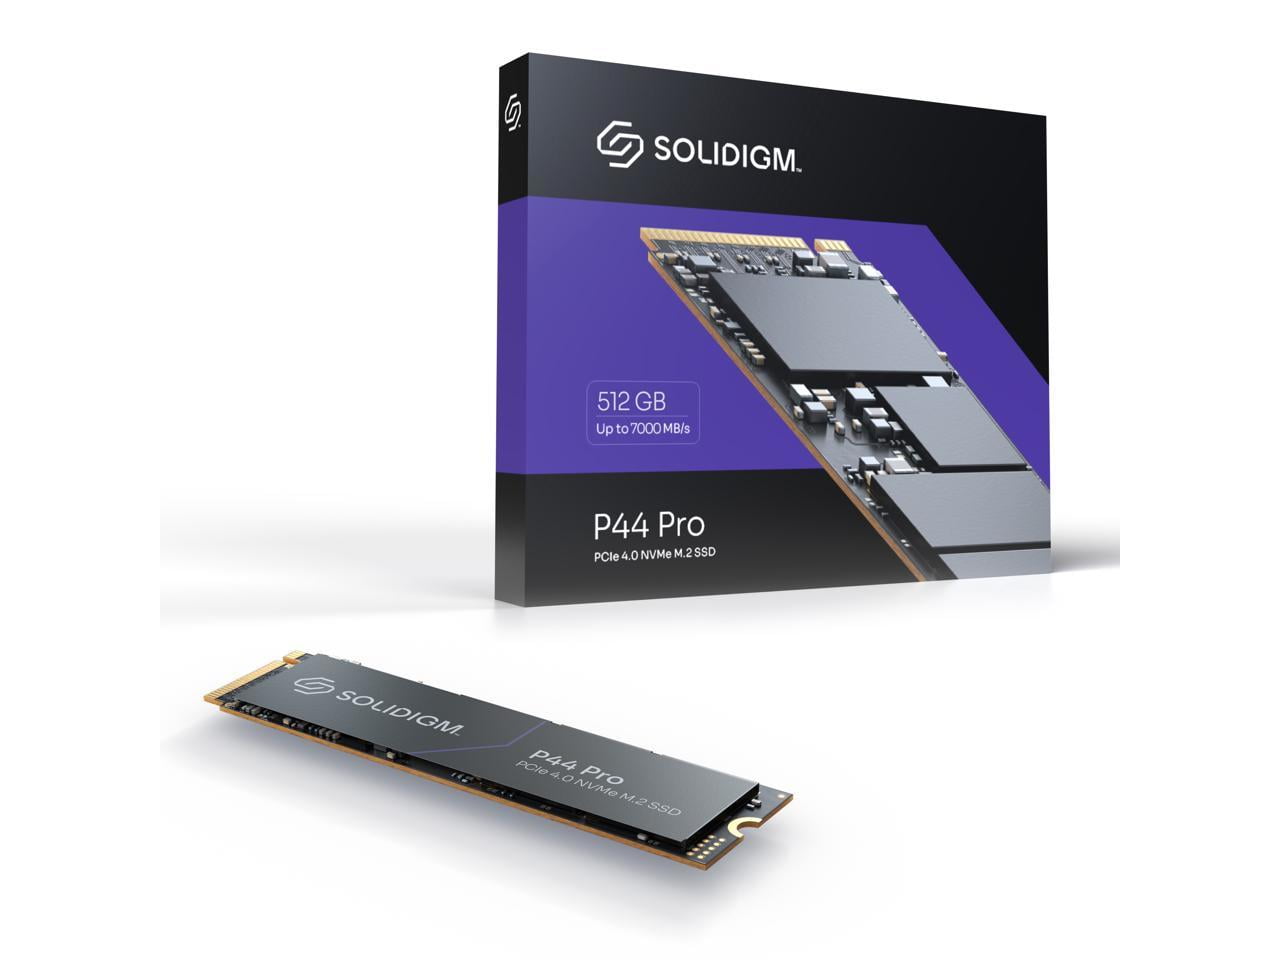 Oyen Digital: Dash Pro NVMe PCIe TLC NAND SSD with Heatsink, Compatible  with Sony PS5 Internal M.2 Slot